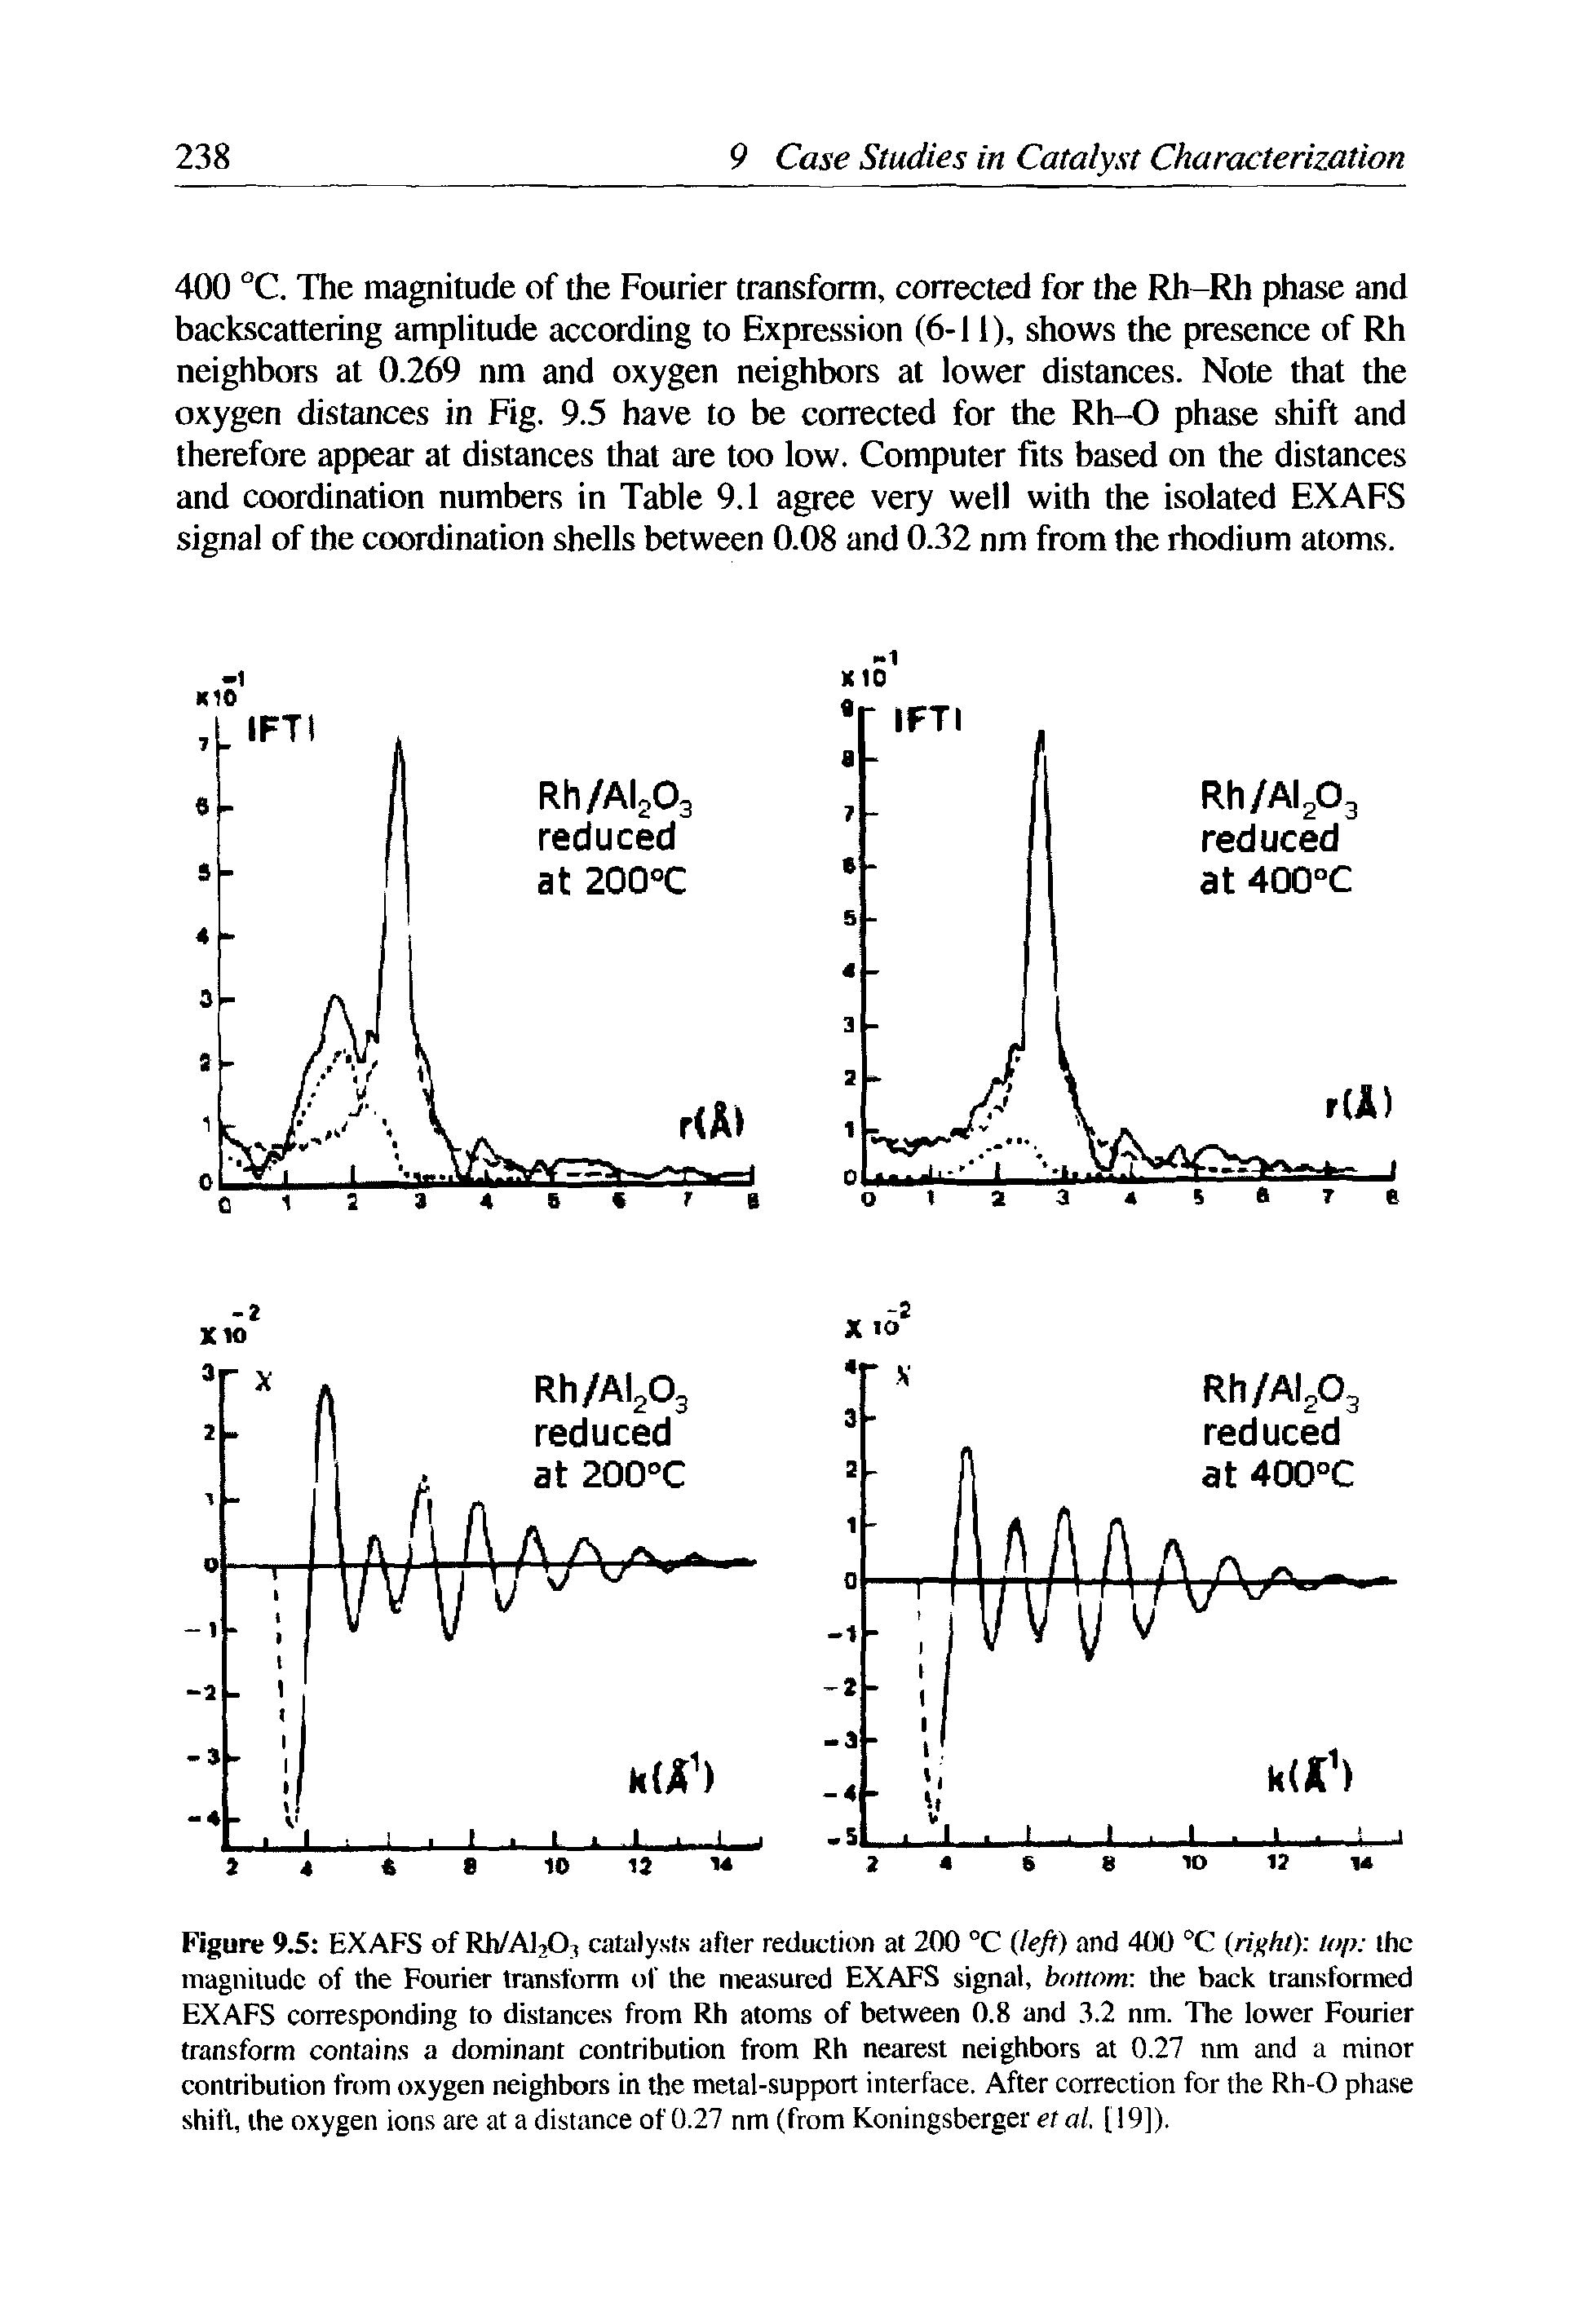 Figure 9.5 EXAFS of Rh/AKO, catalysts after reduction at 200 °C (left) and 400 °C (right) top the magnitude of the Fourier transform of the measured EXAFS signal, bottom the back transformed EXAFS corresponding to distances from Rh atoms of between 0.8 and 3.2 nm. The lower Fourier transform contains a dominant contribution from Rh nearest neighbors at 0.27 nm and a minor contribution from oxygen neighbors in the metal-support interface. After correction for the Rh-O phase shift, the oxygen ions are at a distance of 0.27 nm (from Koningsberger et at. 119]).